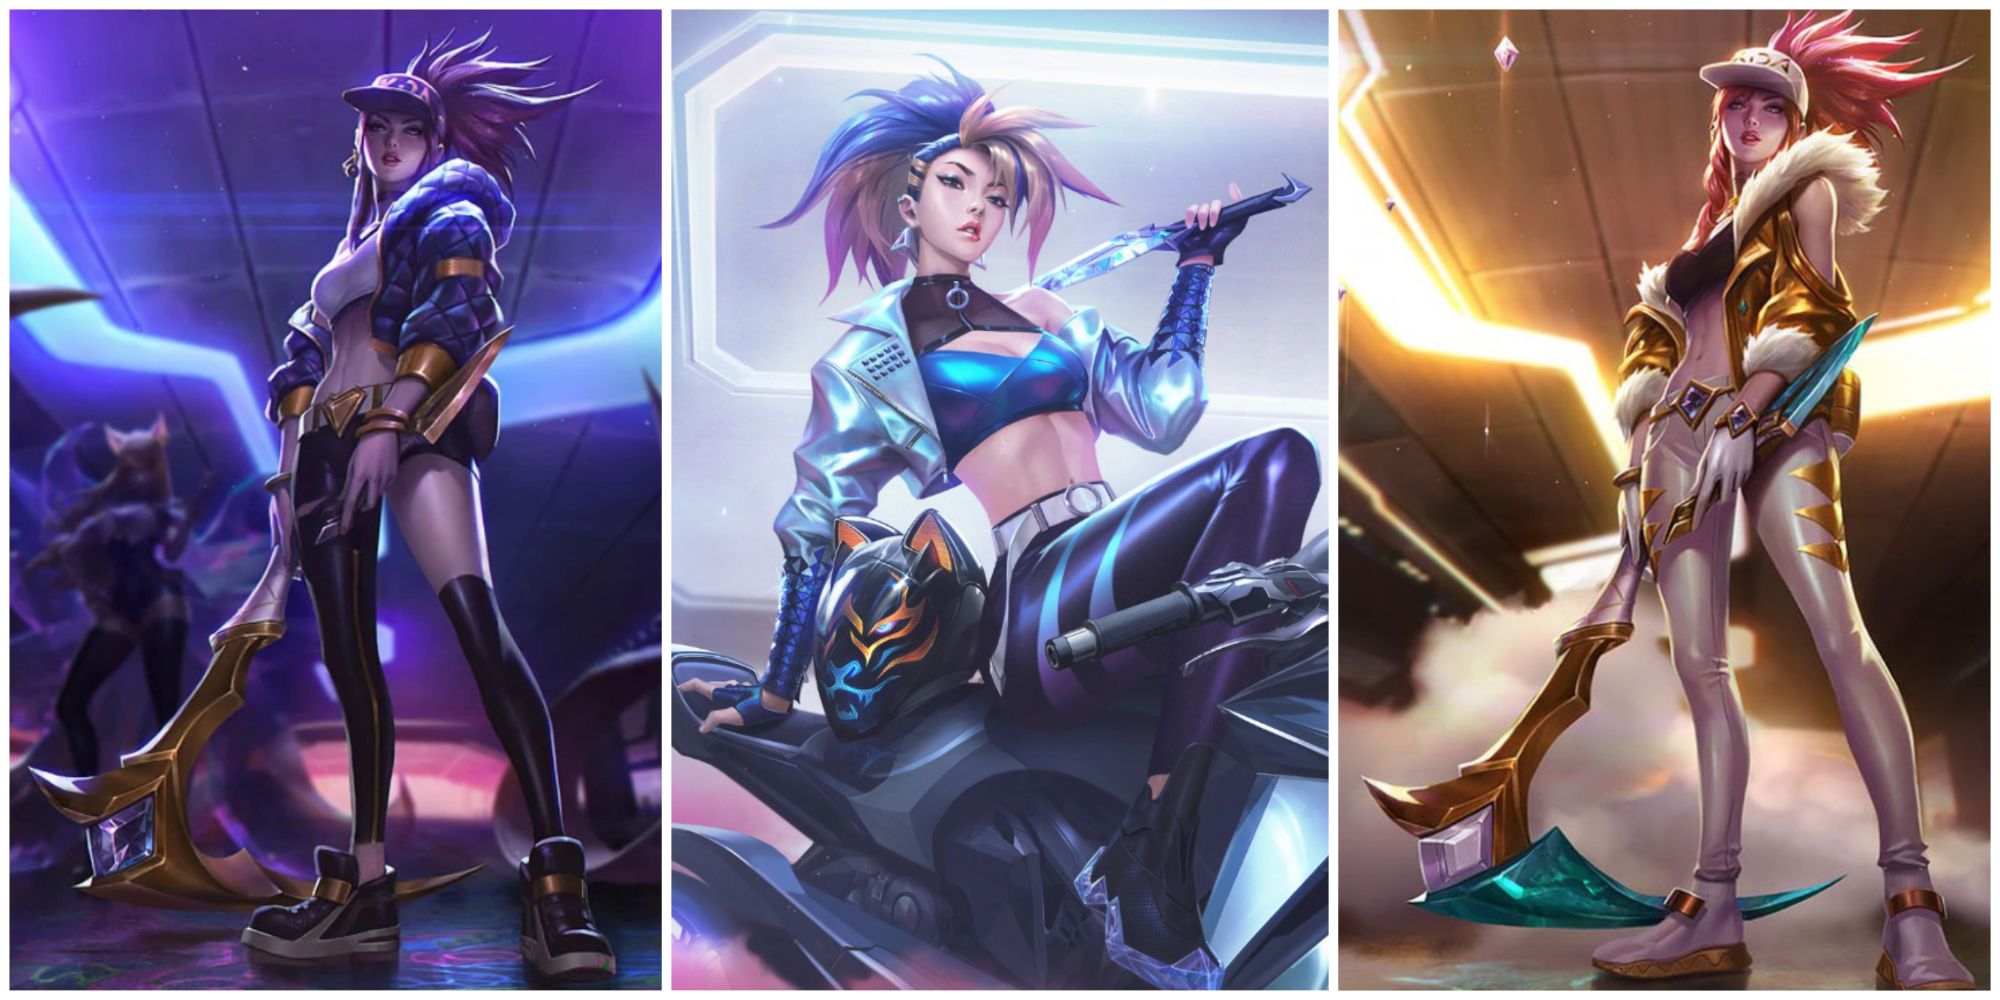 K/DA Akali poses with her kama in her POP/STARS skins, both base and prestige, and sits on her bike in her ALL OUT outfit